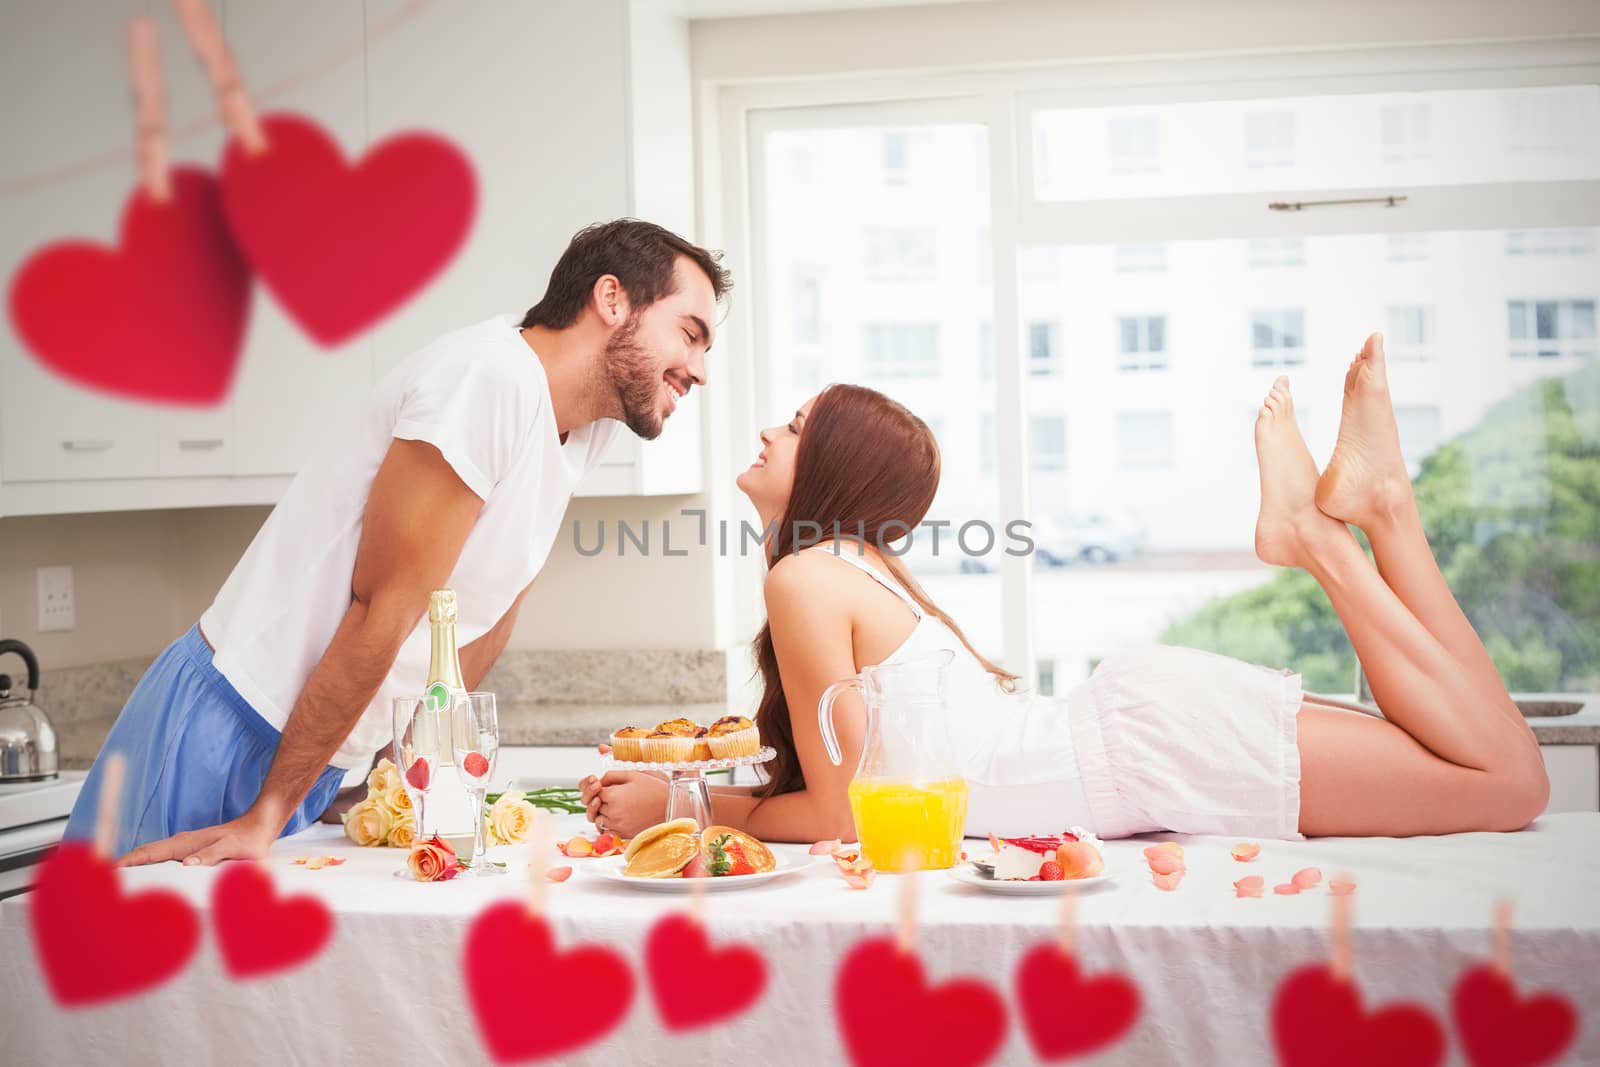 Young couple having a romantic breakfast against hearts hanging on a line